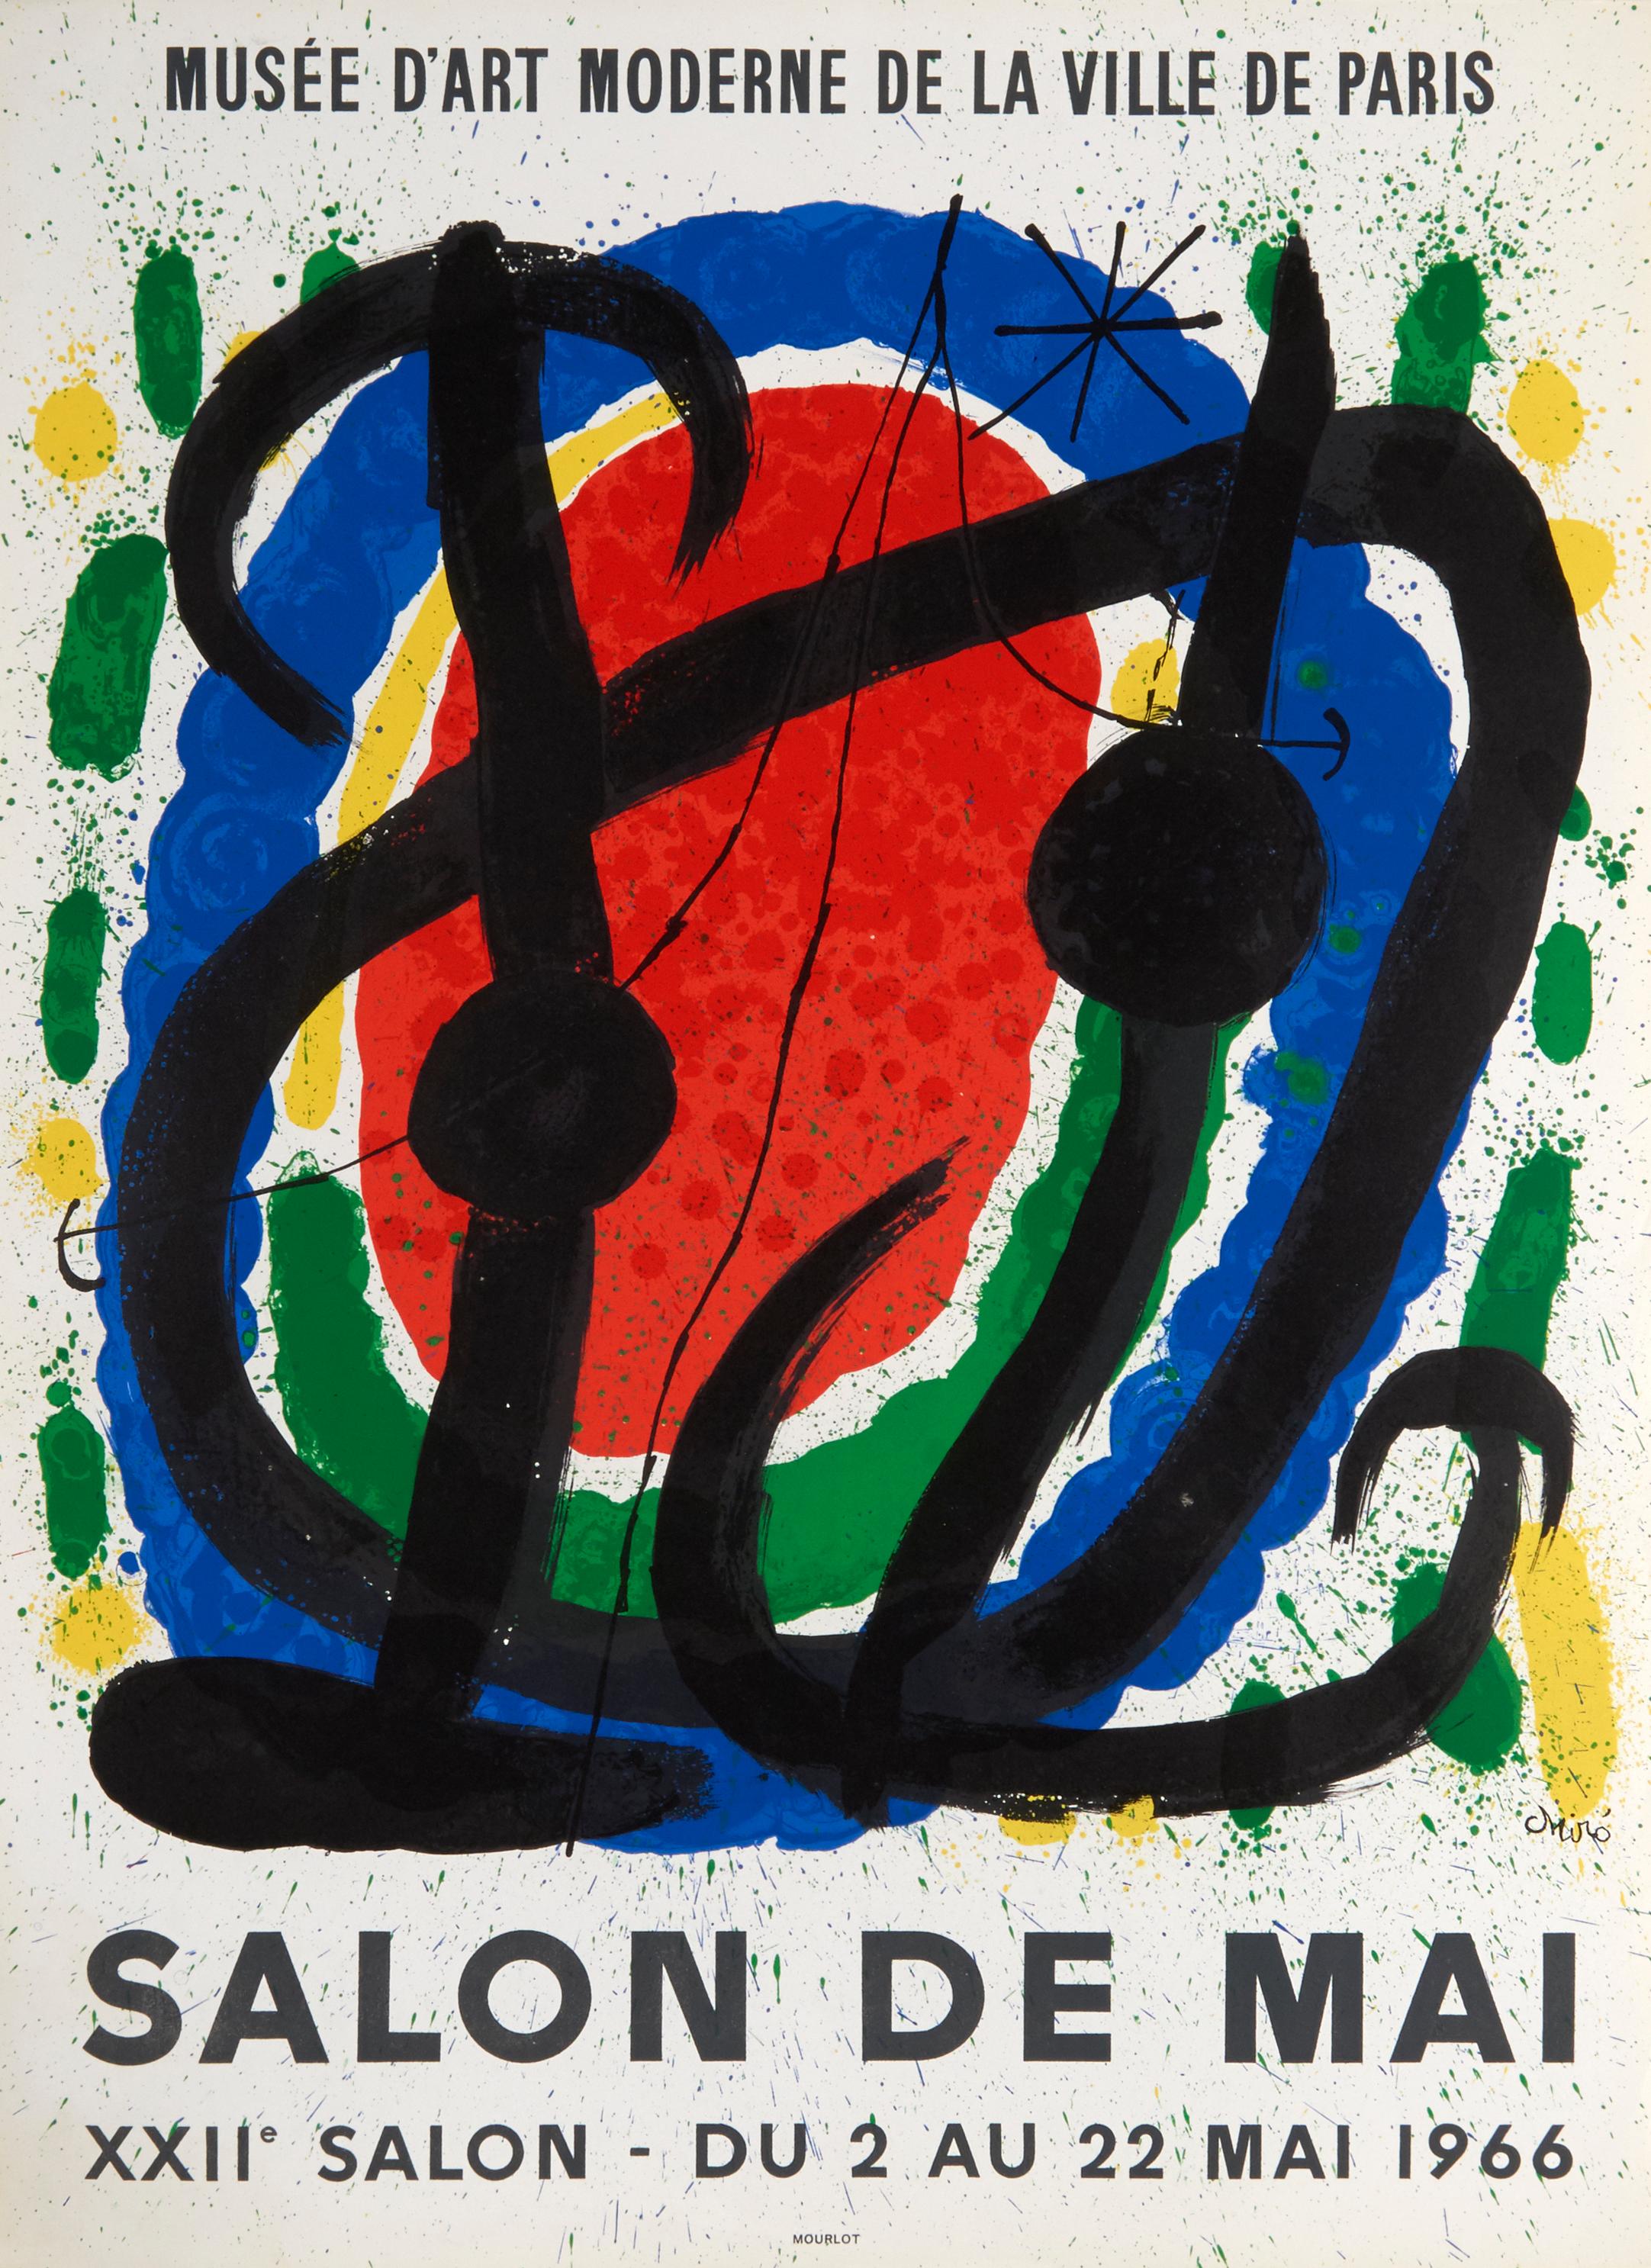 Salon de Mai After Joan Miro - abstract lithographic poster